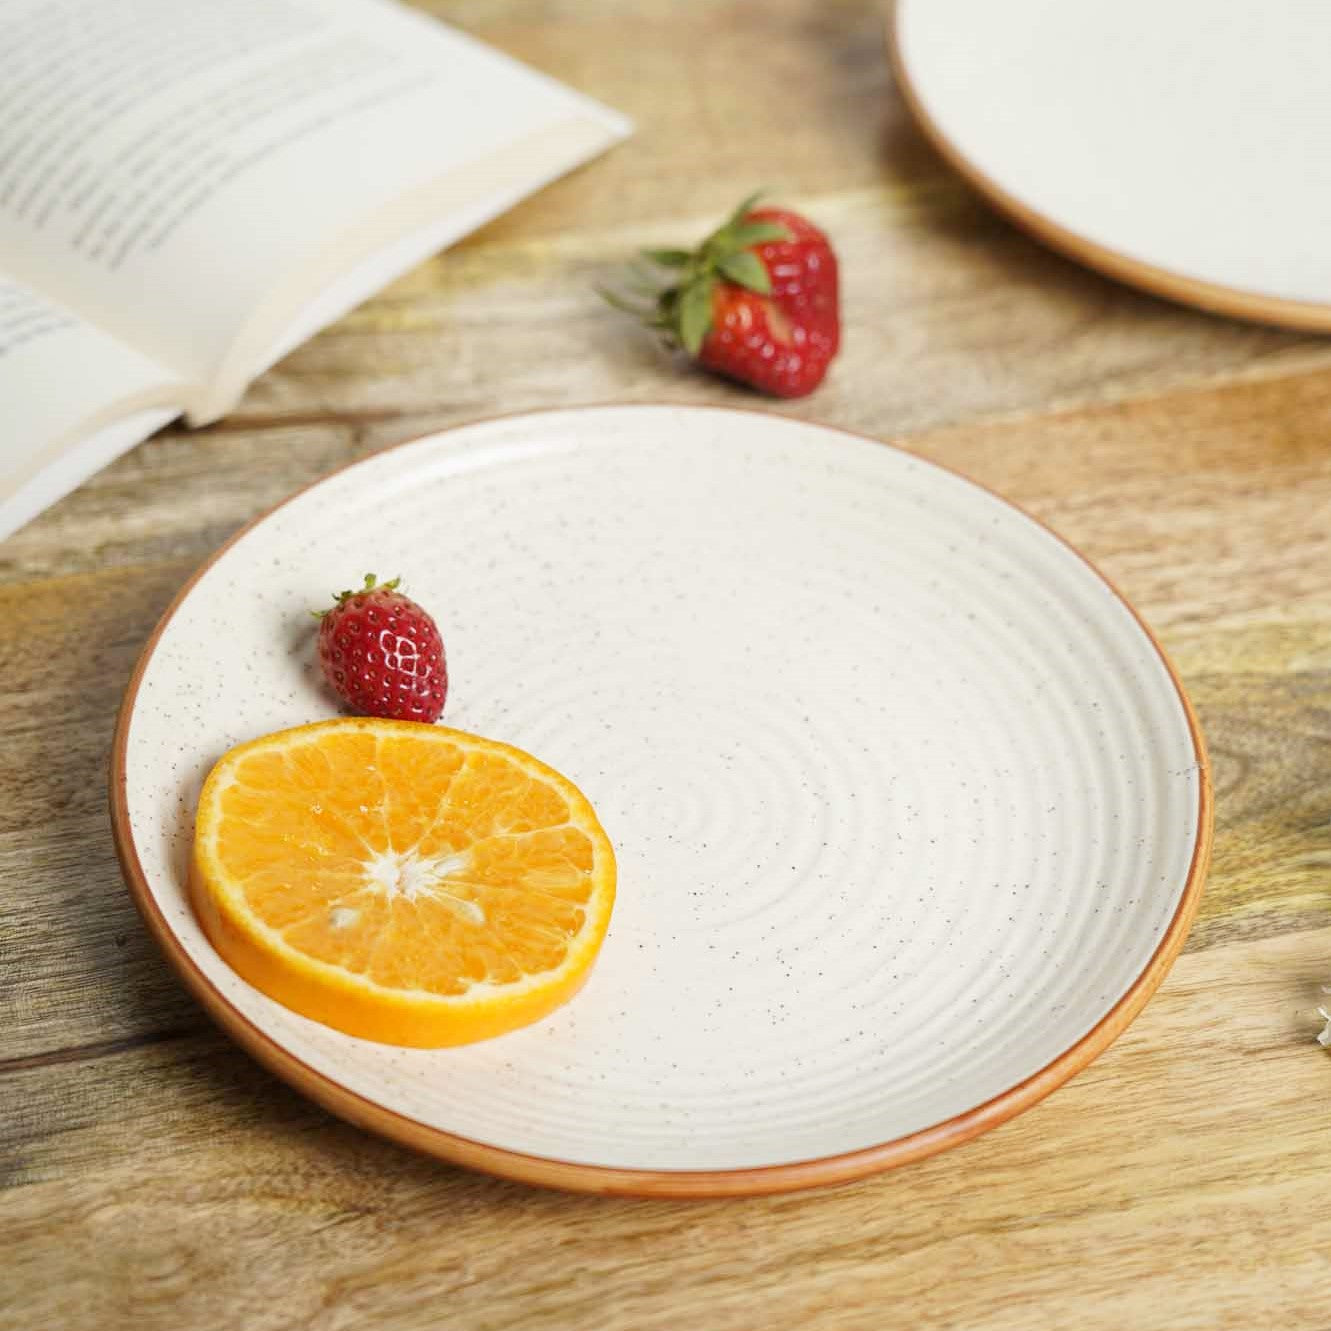 Cookie Crumble - Quarter/Snacks Plate - Set of 2